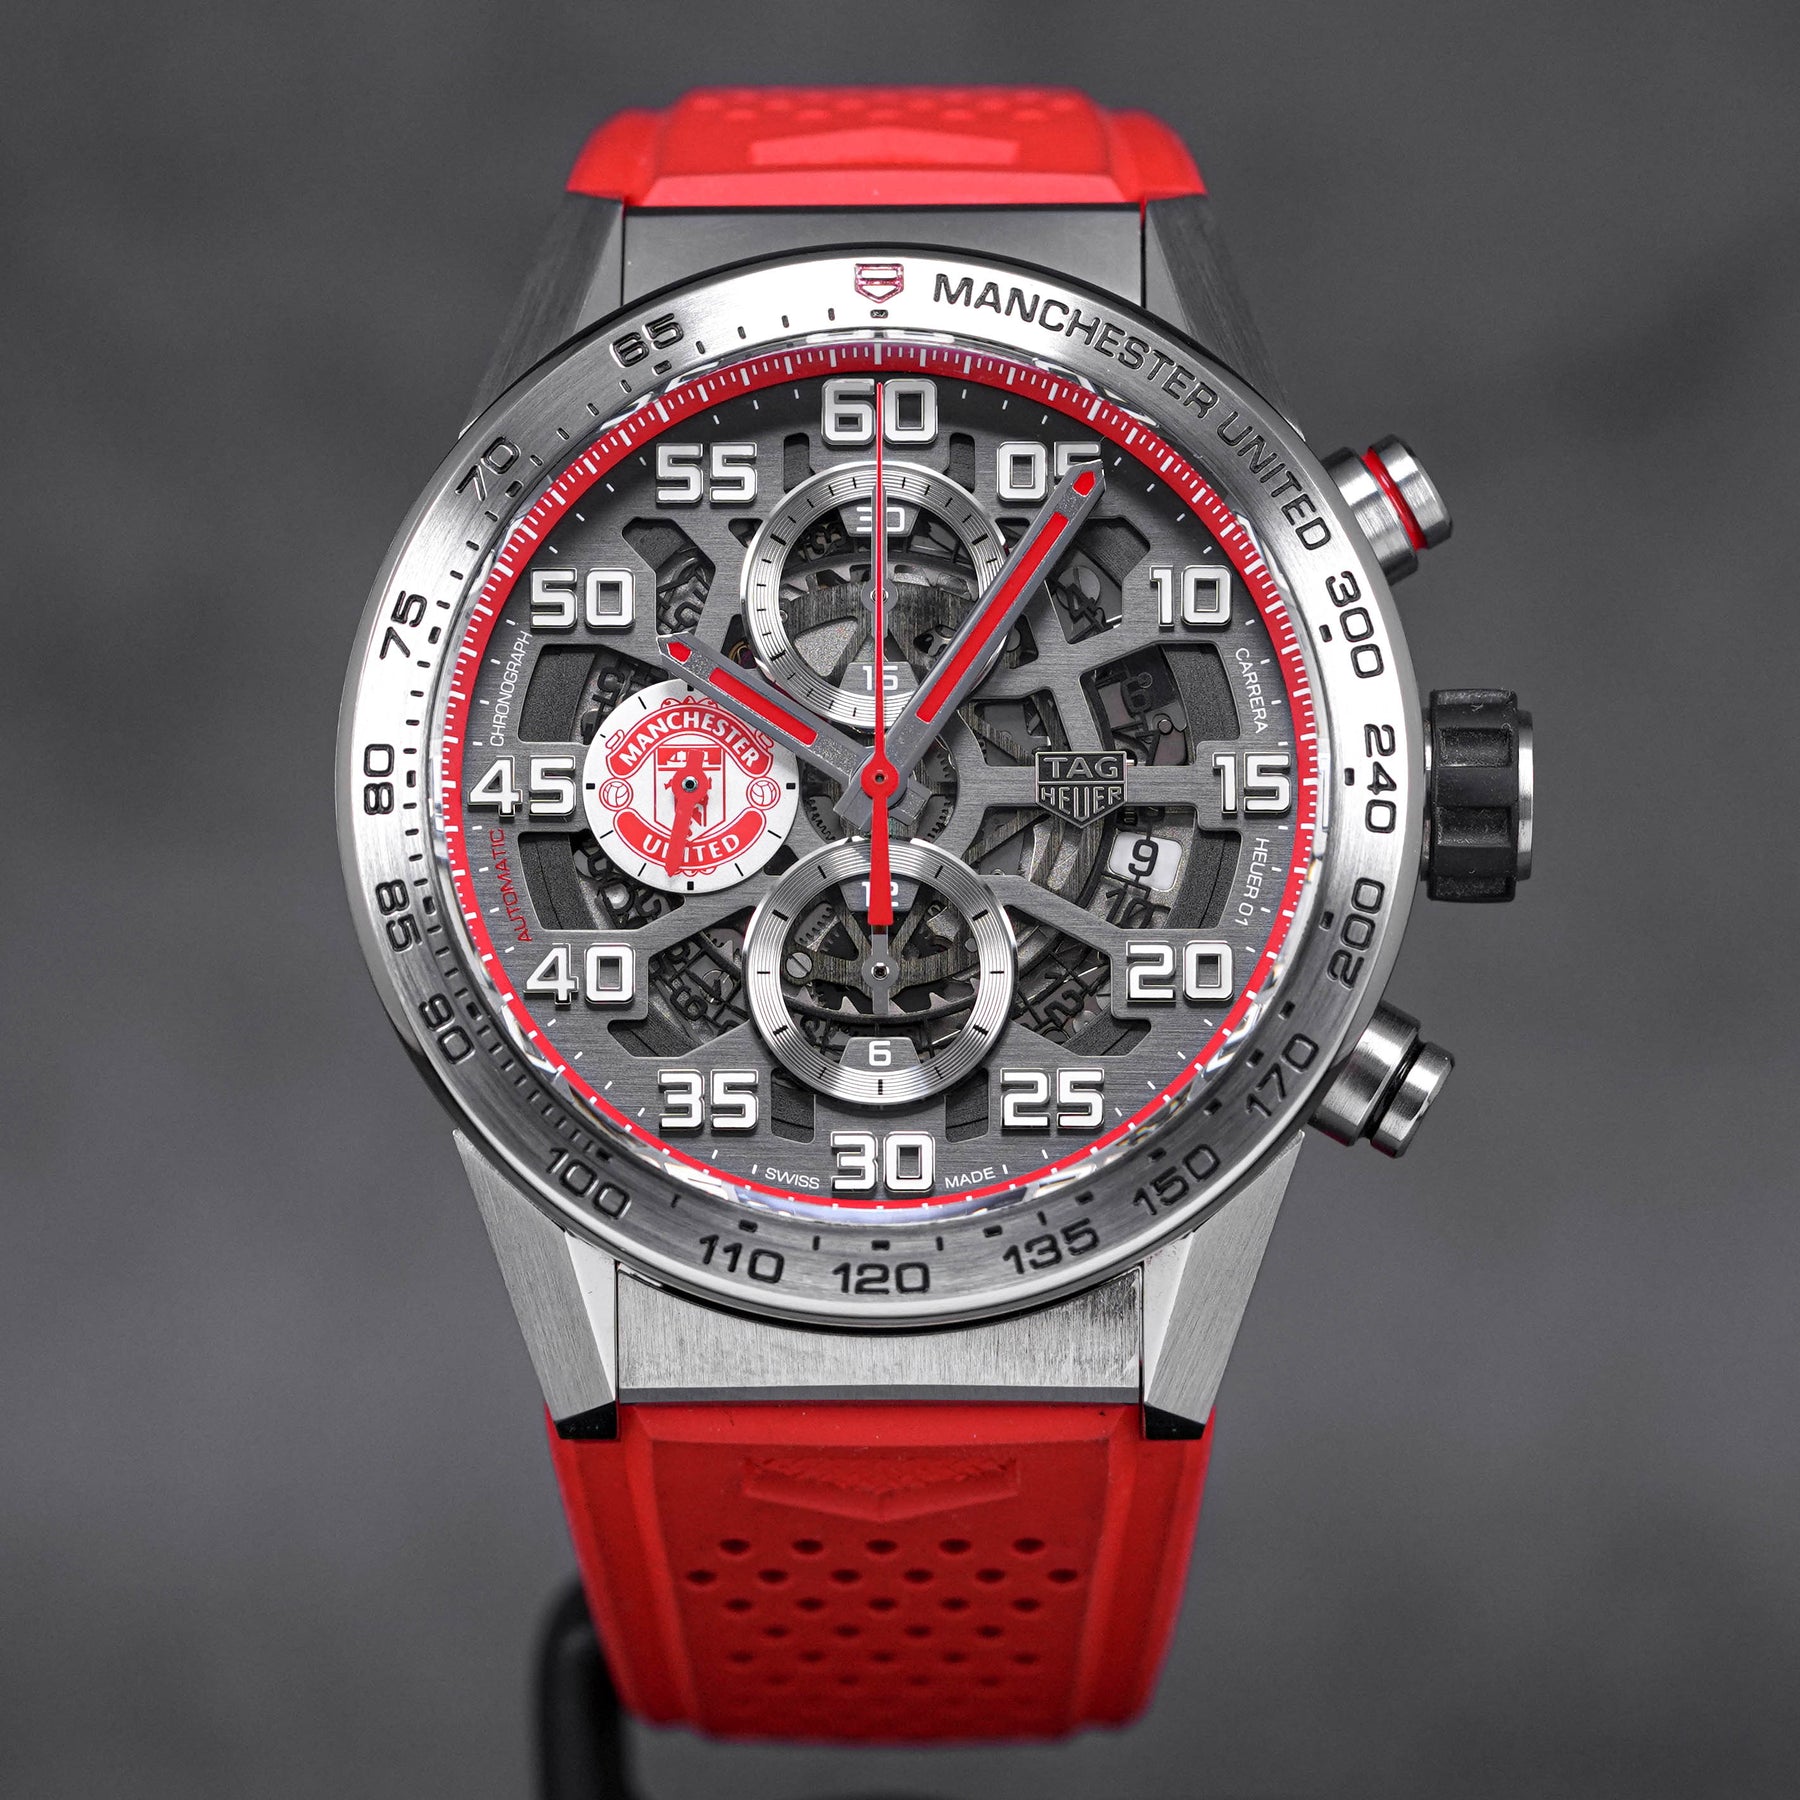 Tag Heuer Manchester United